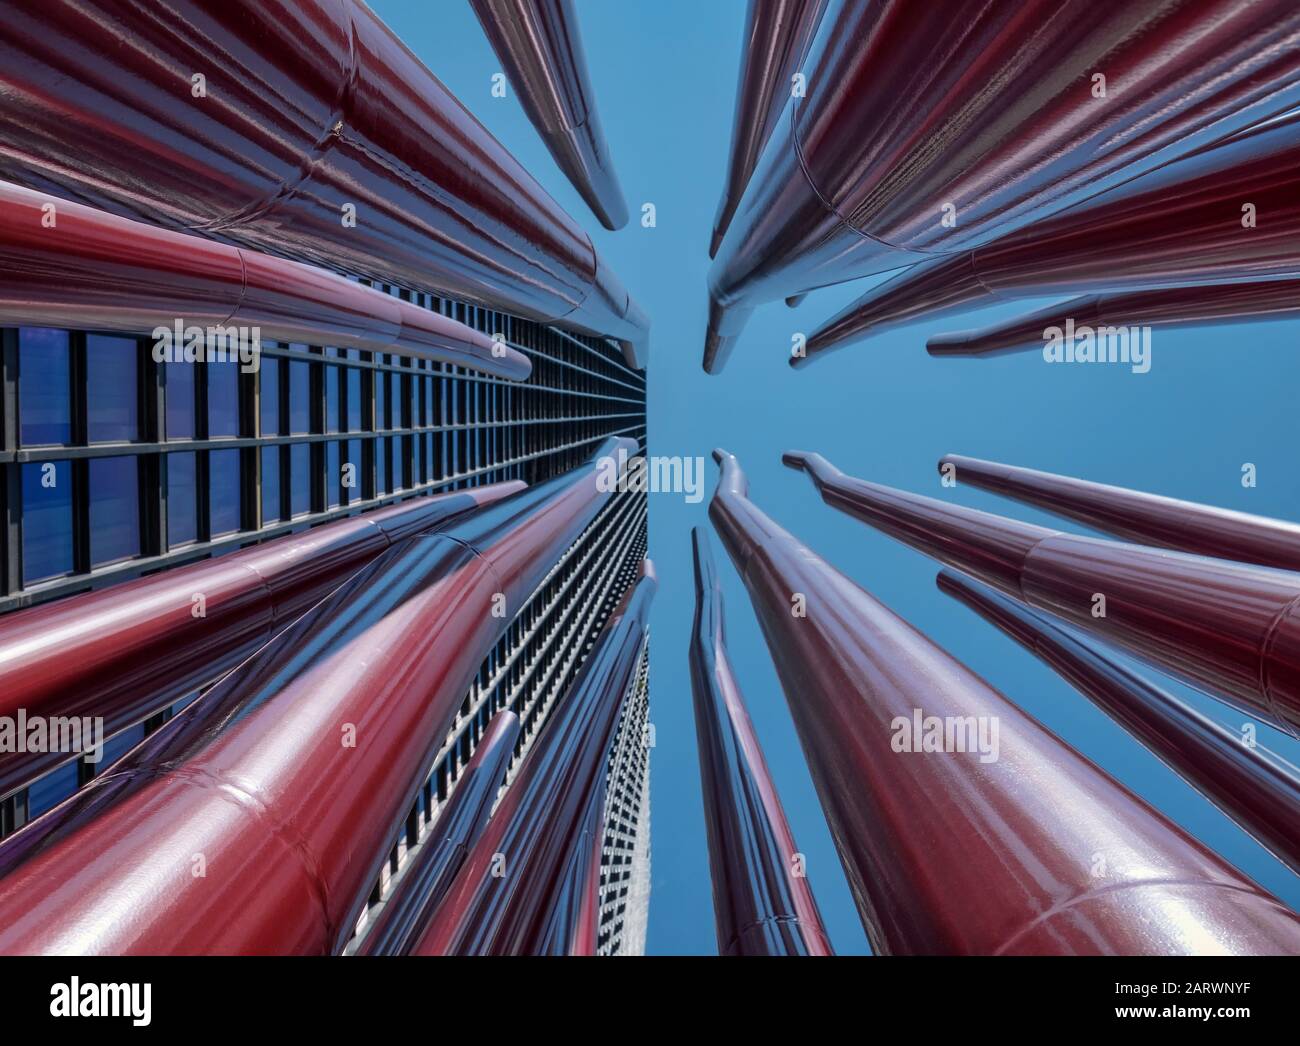 The X Condominium Building and Red Double Vision Art Sculpture, 110 Charles St East, Toronto, Kanada Stockfoto